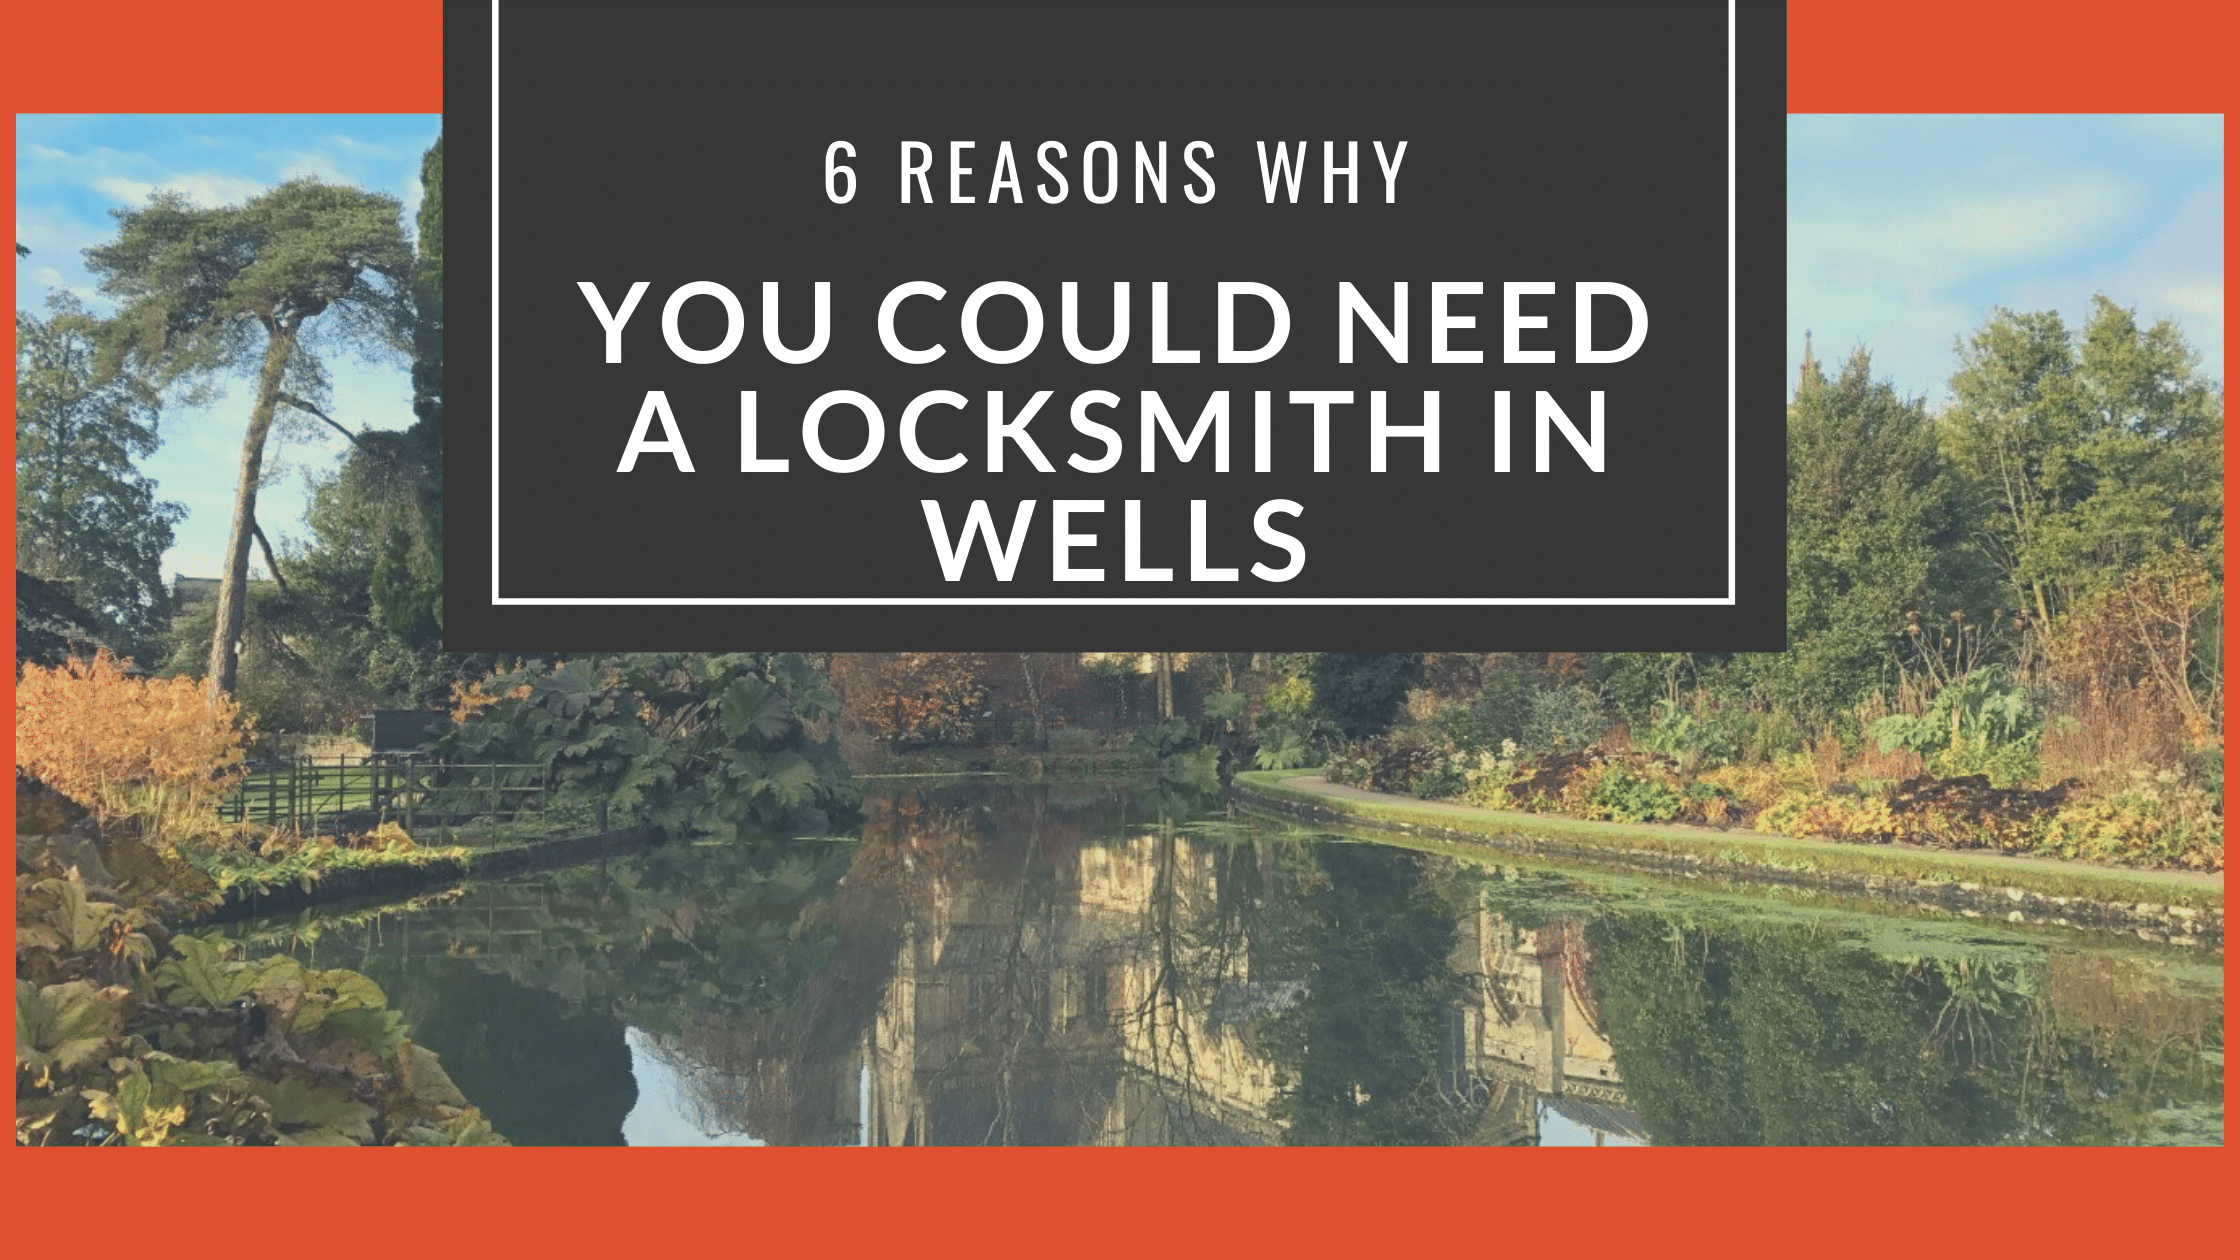 6 Reasons Why You Could Need A Locksmith In Wells